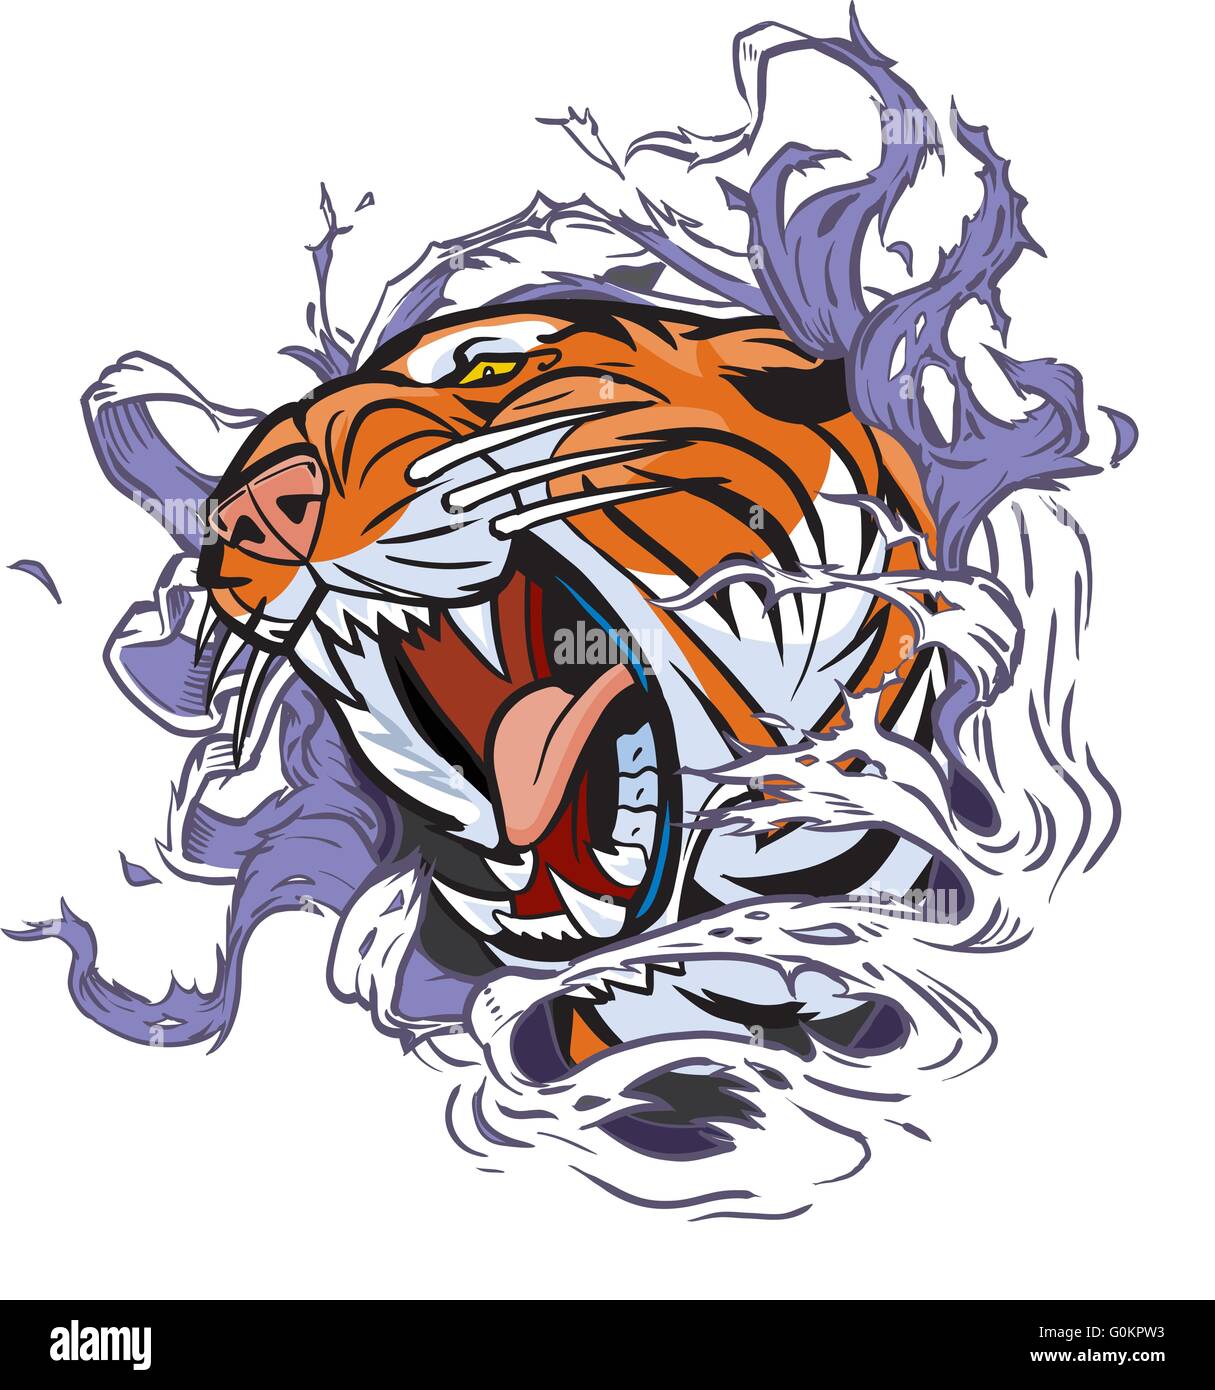 Vector Cartoon Clip Art Illustration of a roaring tiger head ripping out of a hole in the background. Stock Vector